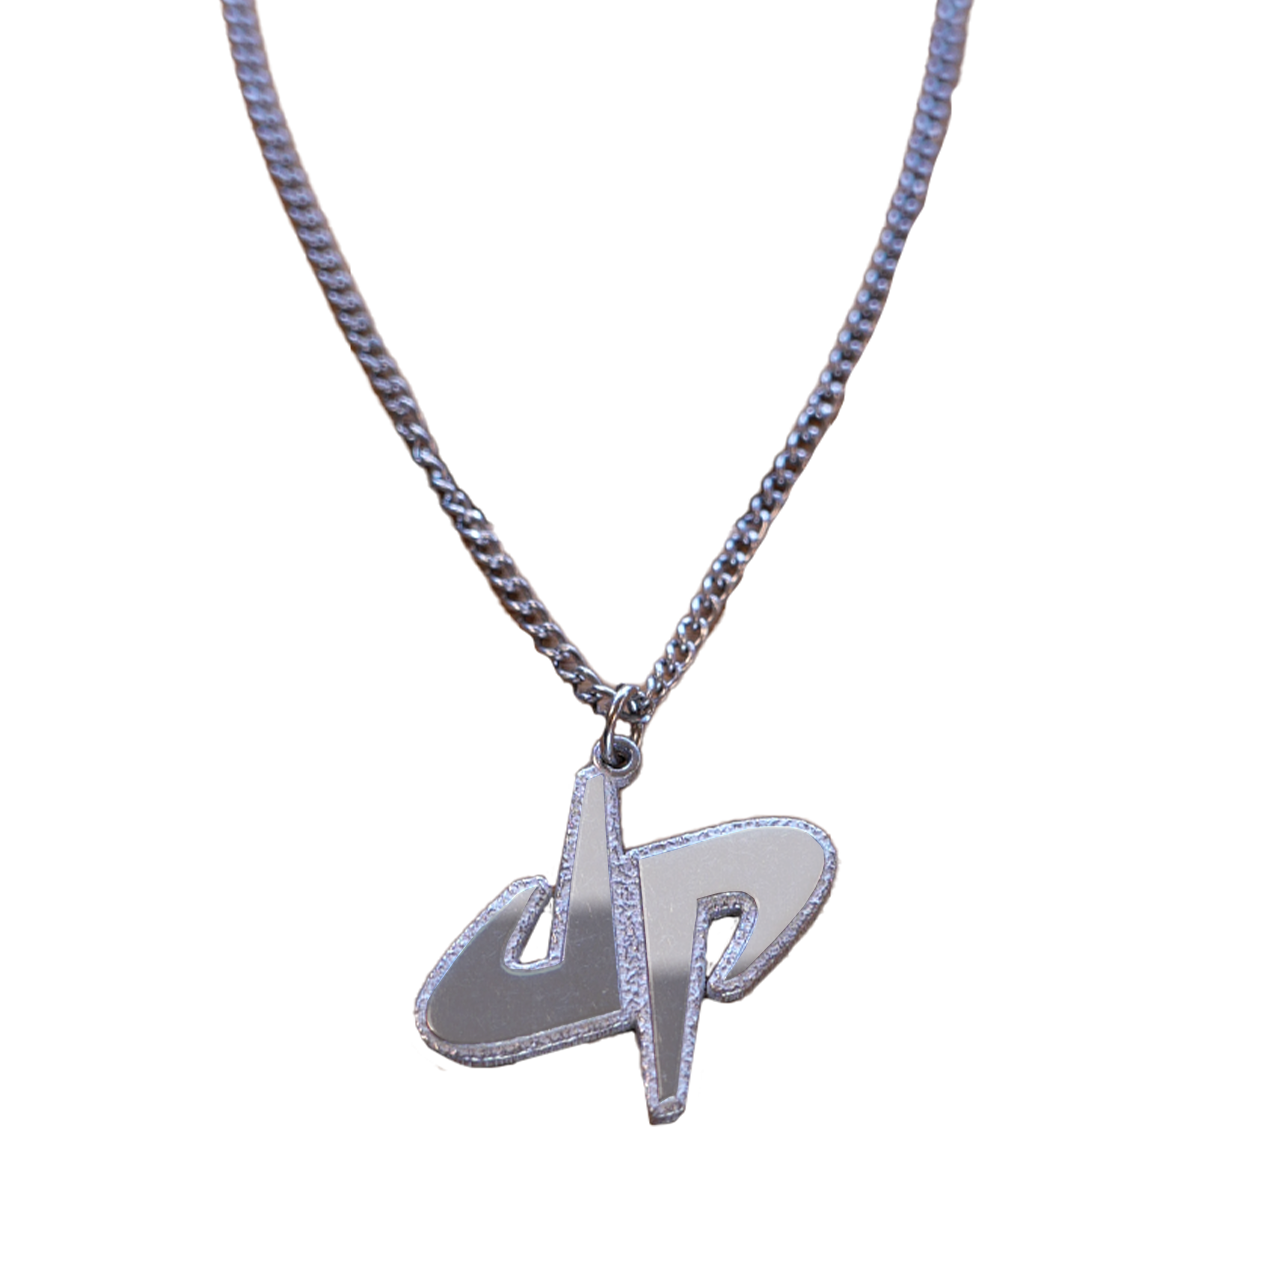 DP15 Custom Necklace (LIMITED EDITION)